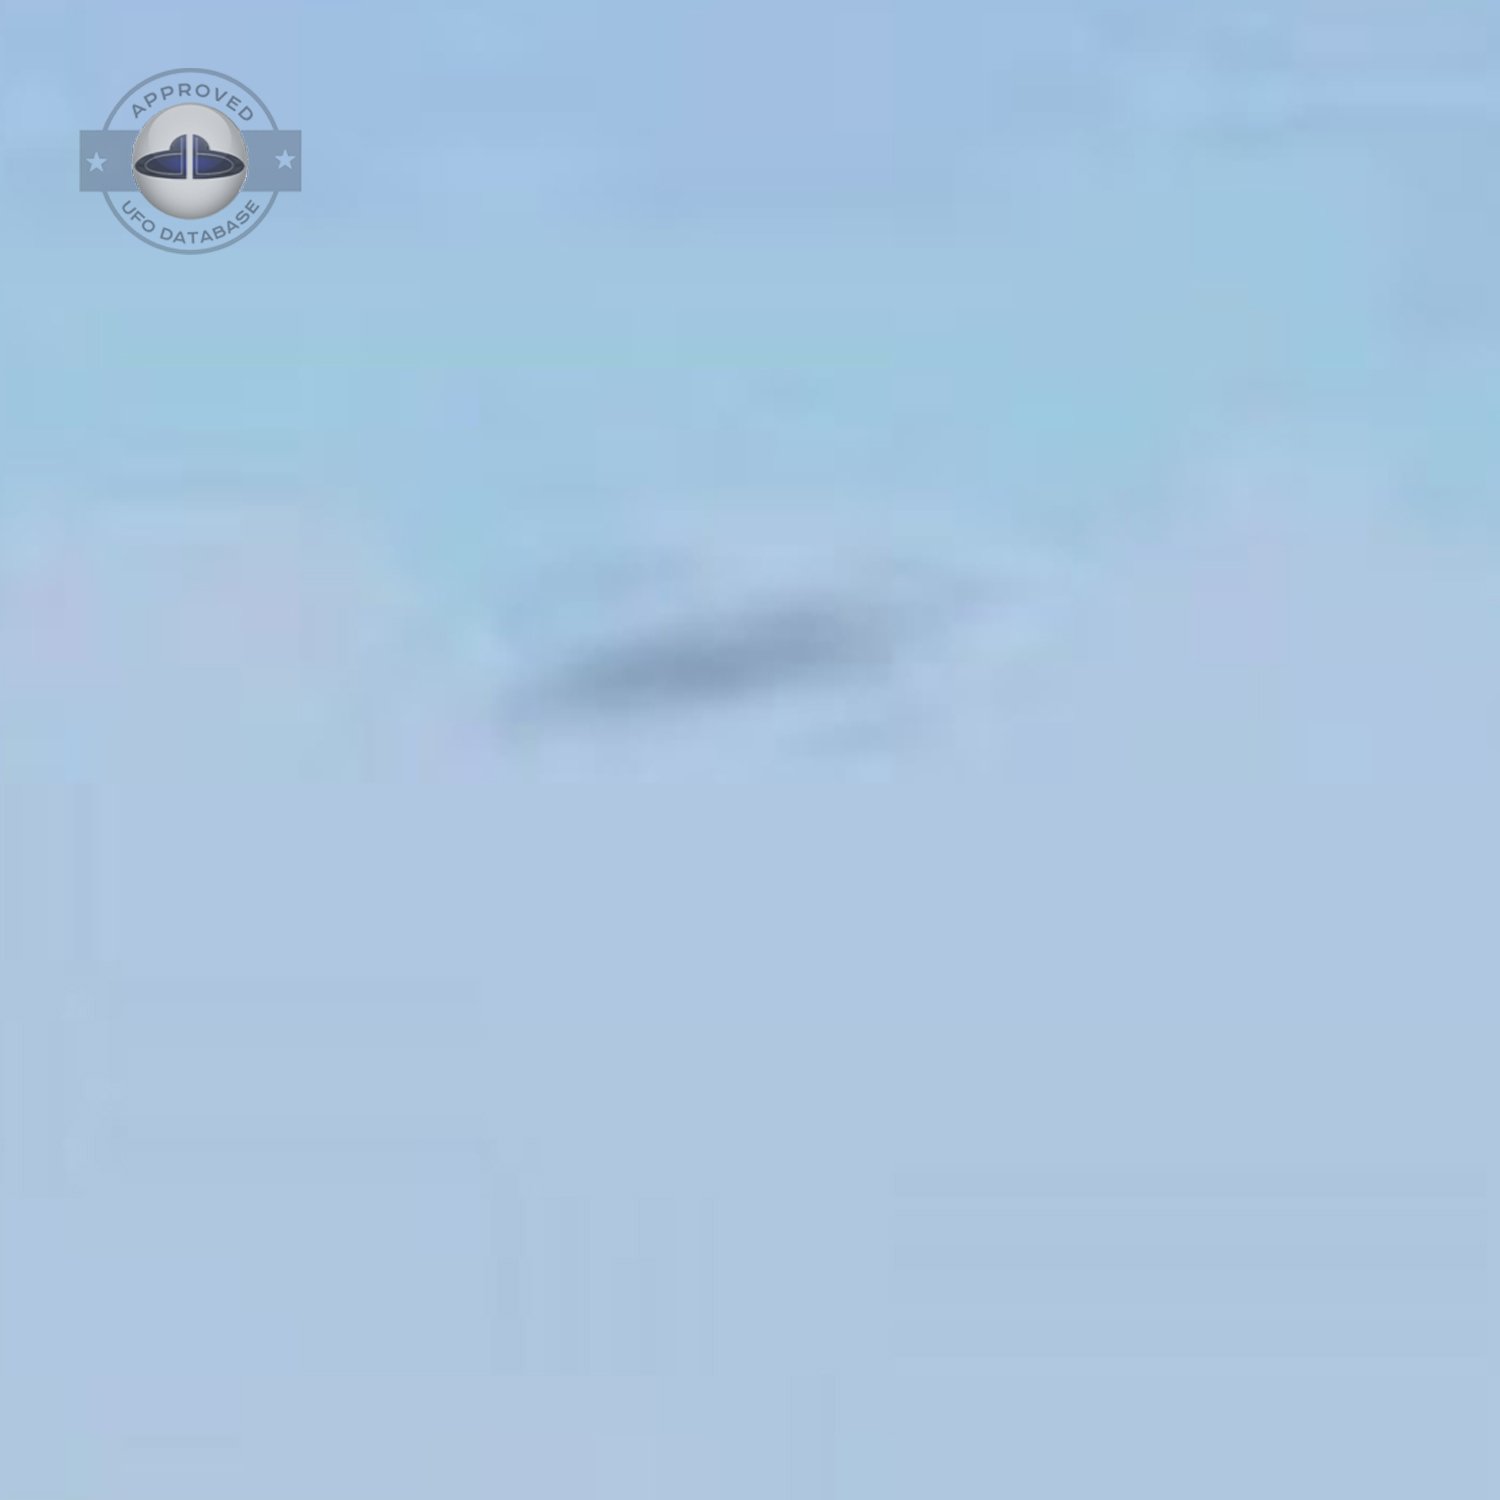 UFO picture taken in the Ica Region of Peru next to the Nazca region UFO Picture #53-5